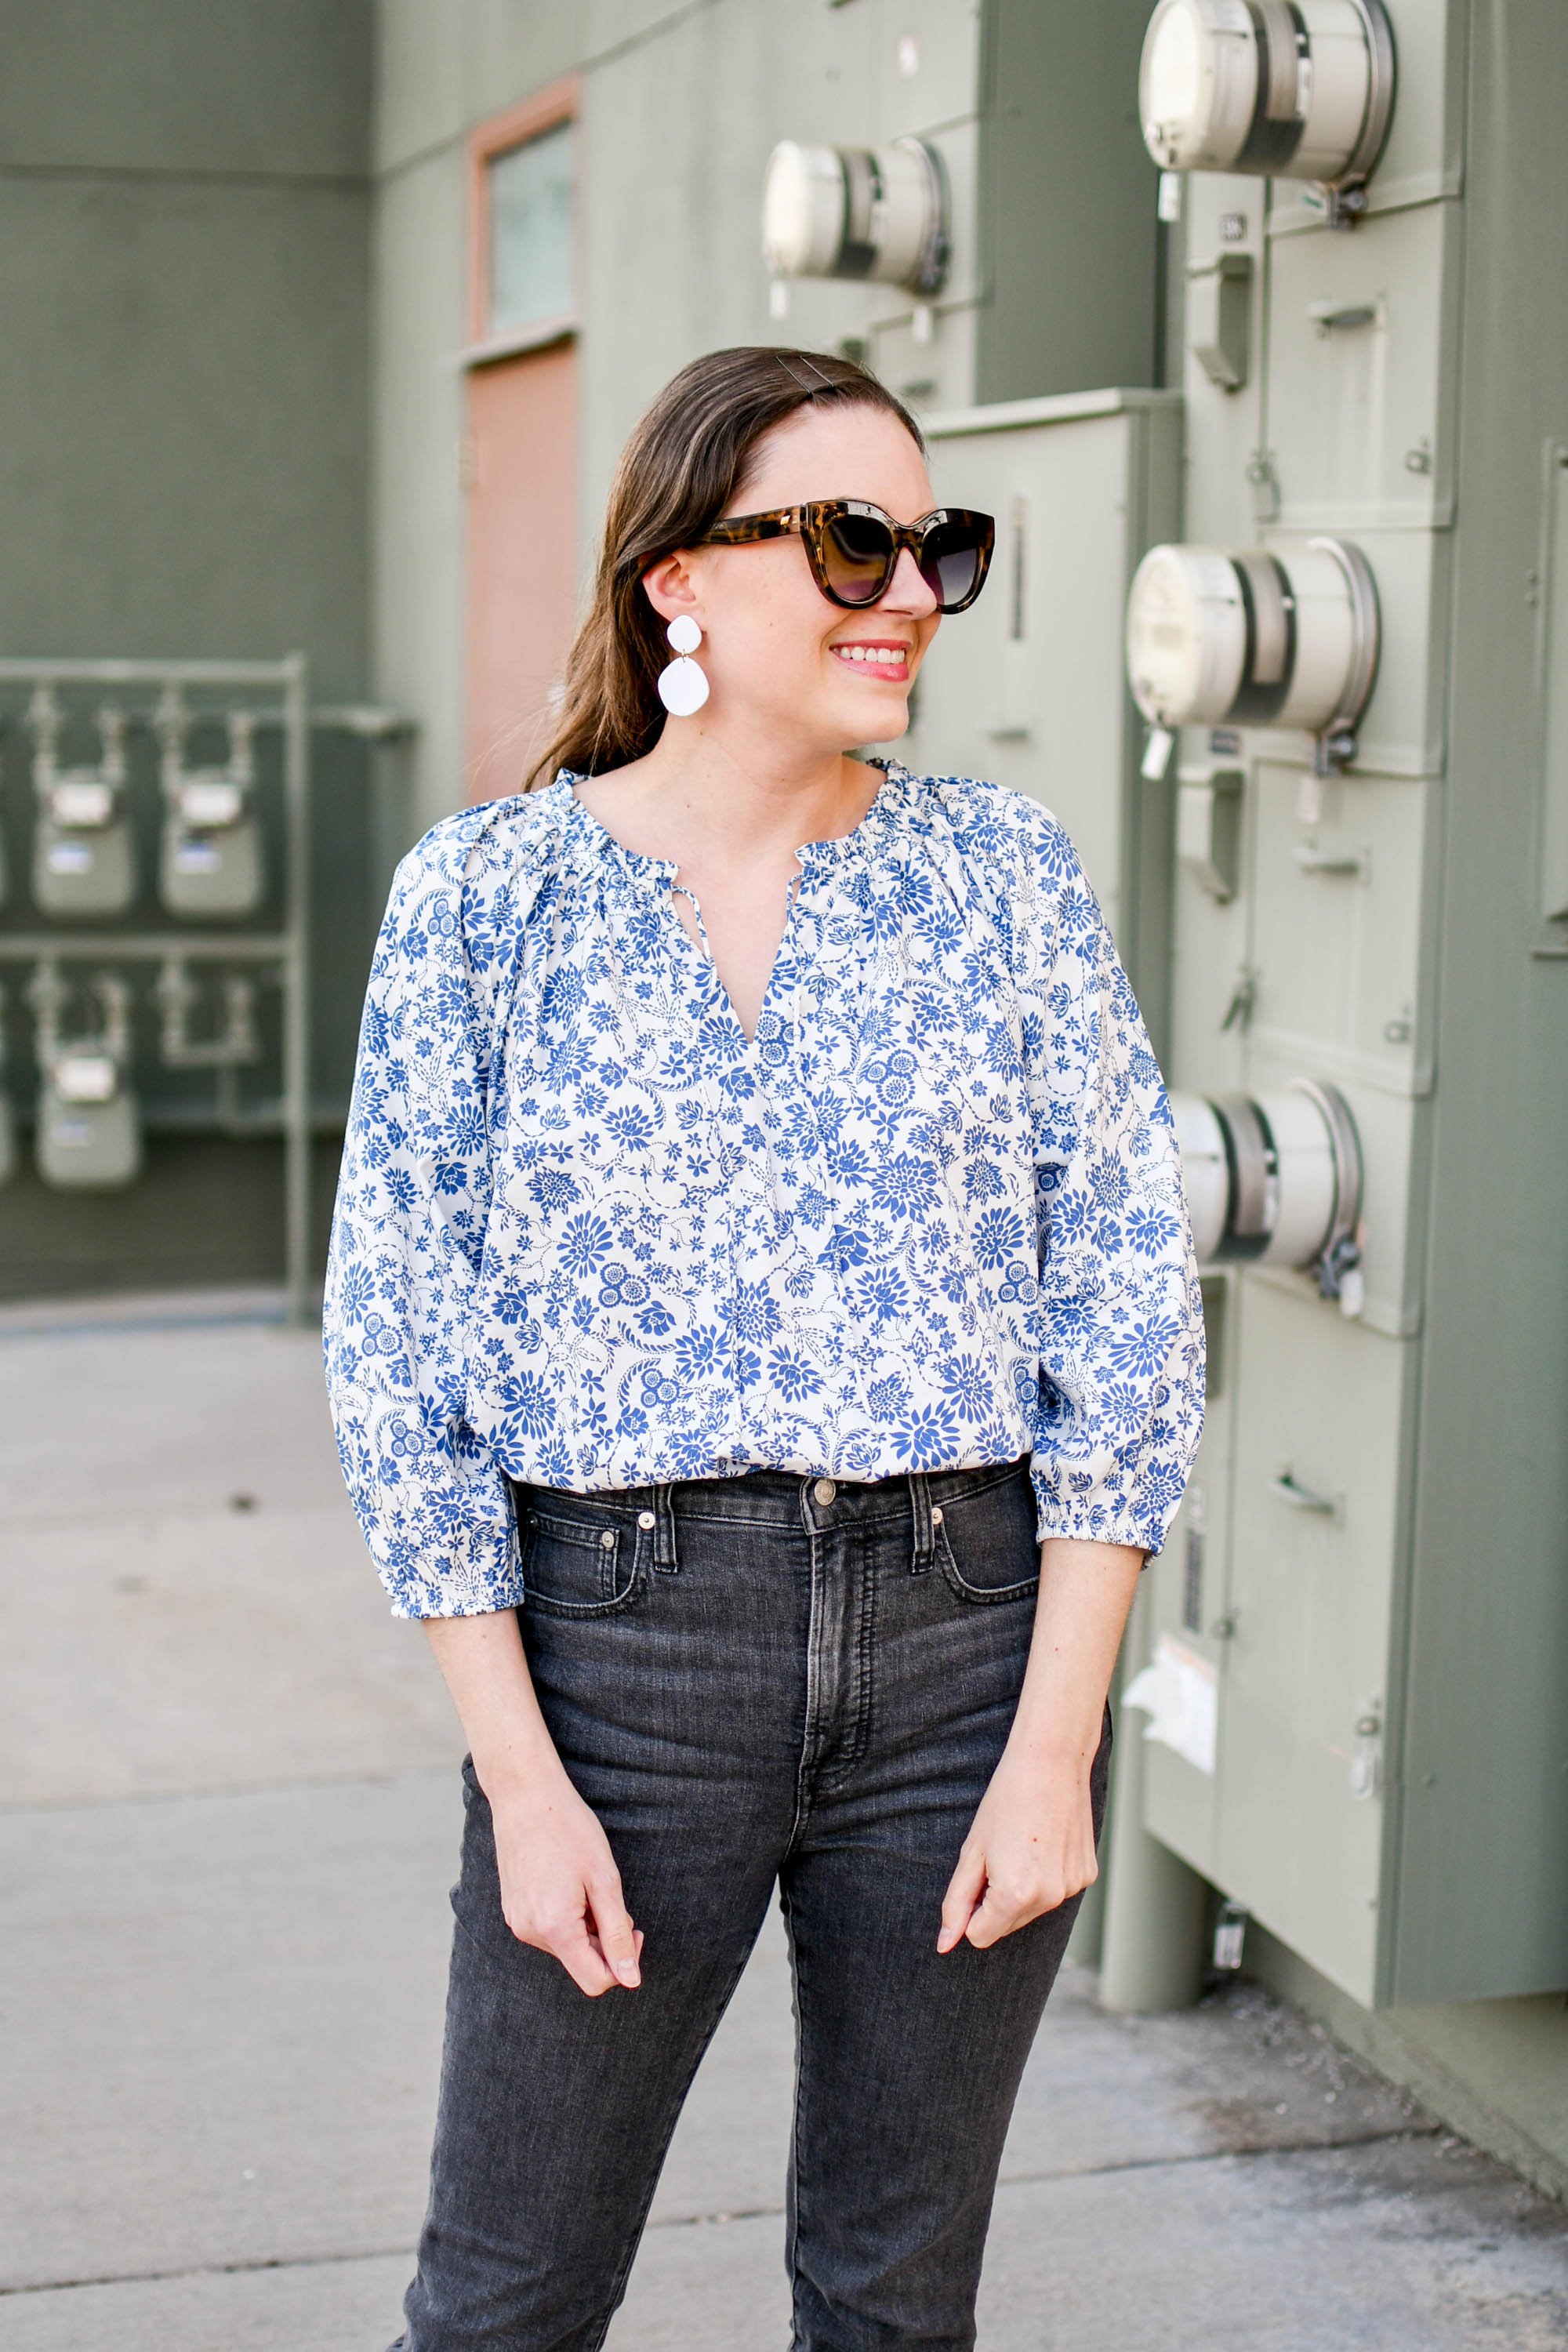 An Unexpected Way to Style a Floral Blouse